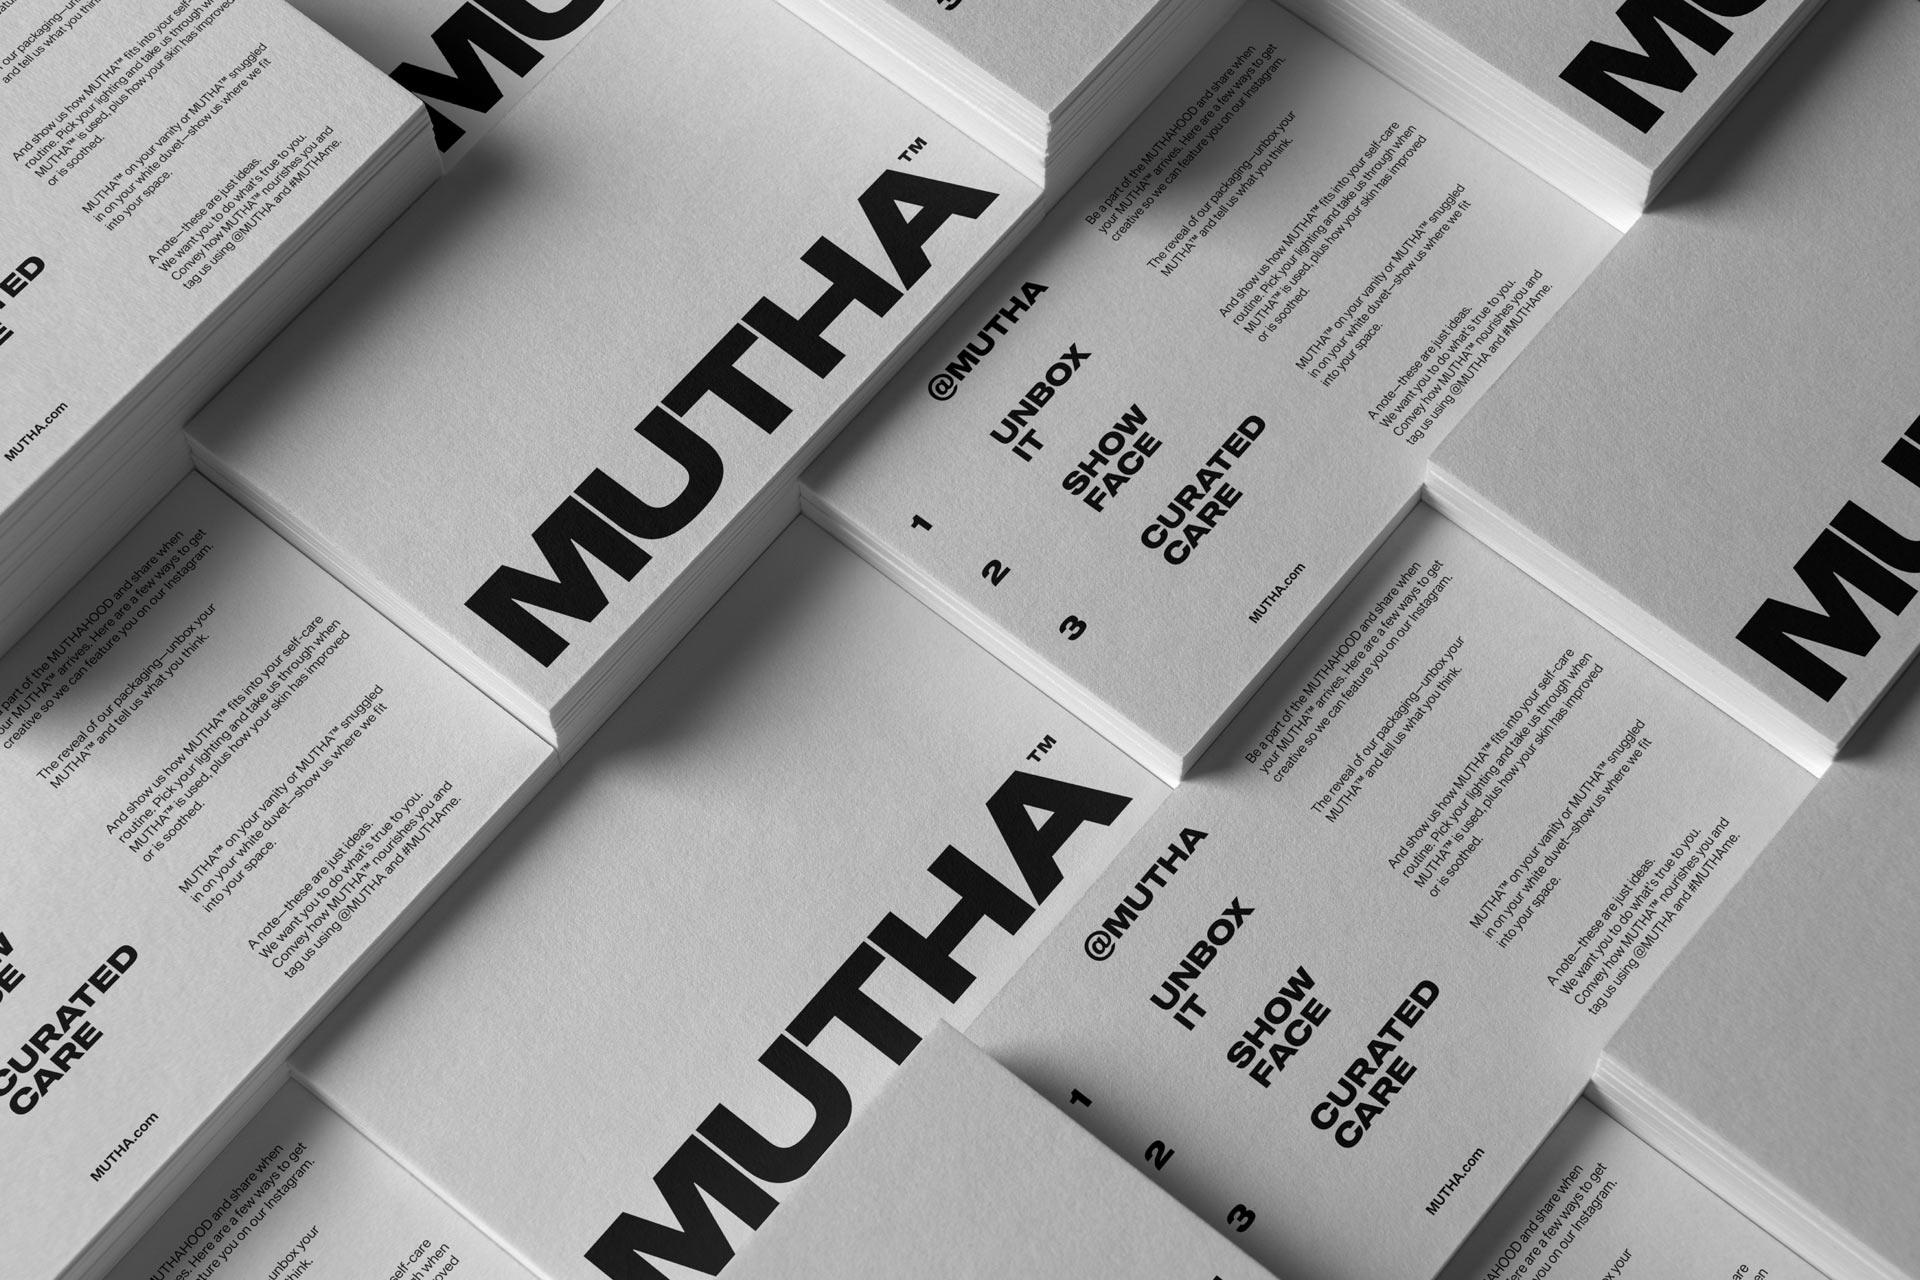 New Logo, Identity, and Packaging for MUTHA by Character